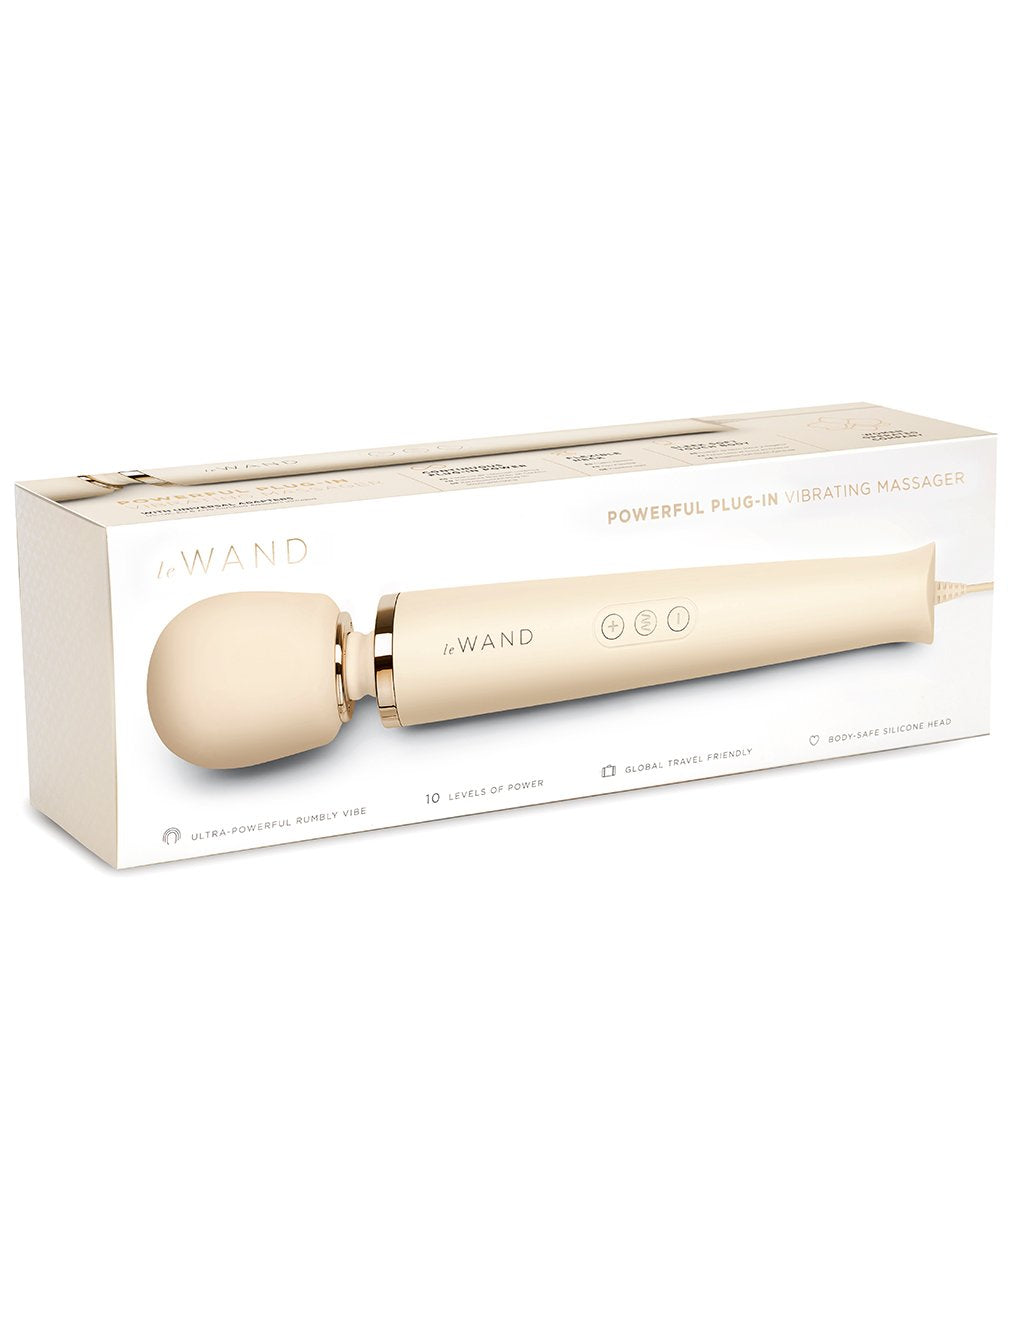 Le Wand Plug-In Vibrating Body Massager with 8 Foot Cord- Cream- Box